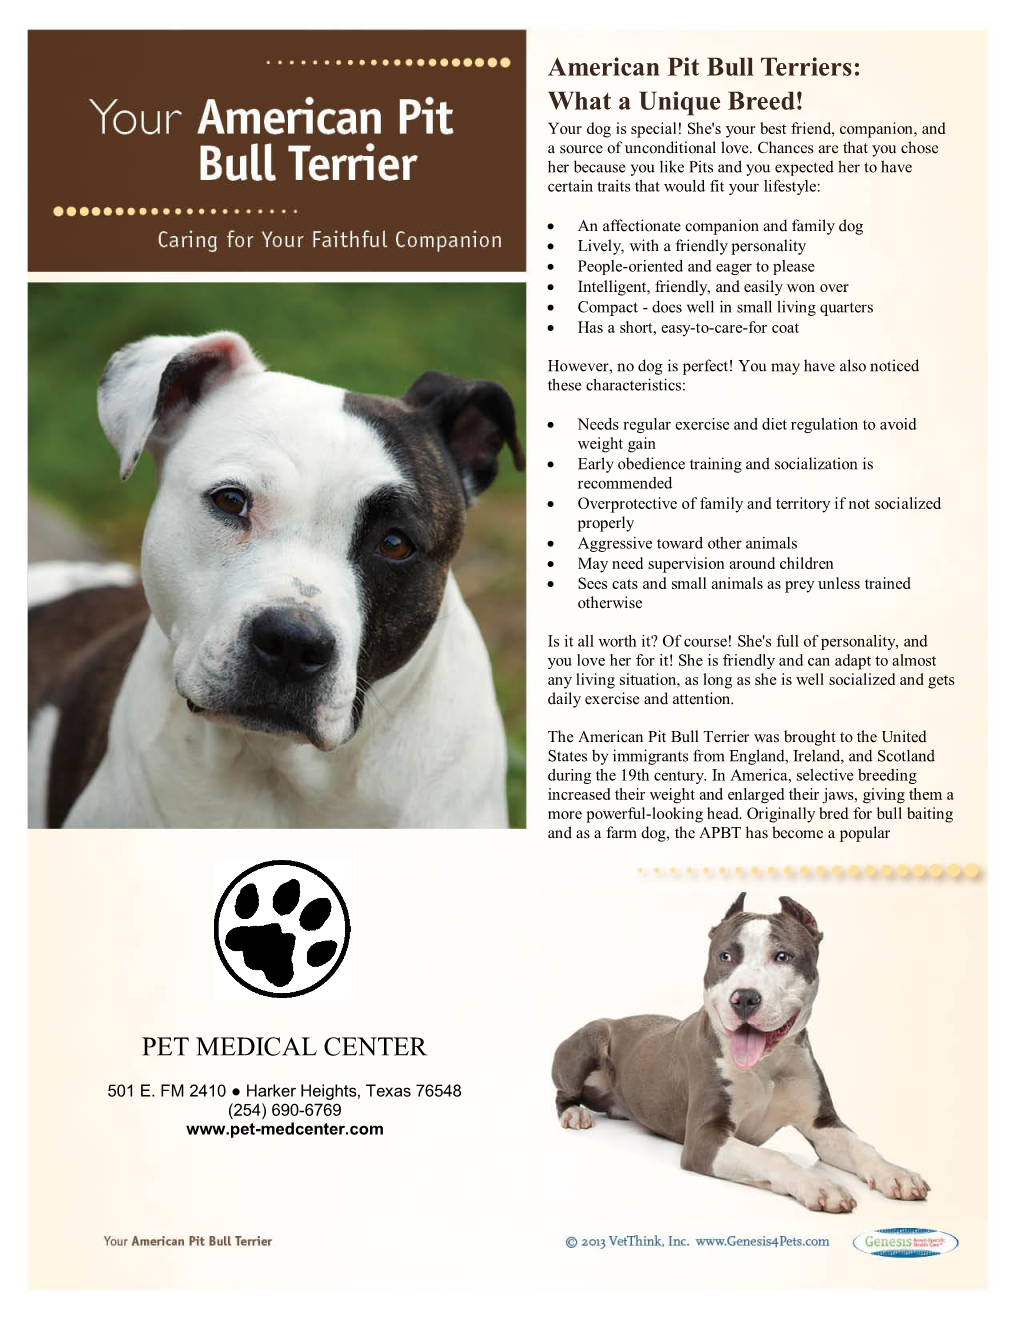 American Pit Bull Terriers: What a Unique Breed! PET MEDICAL CENTER